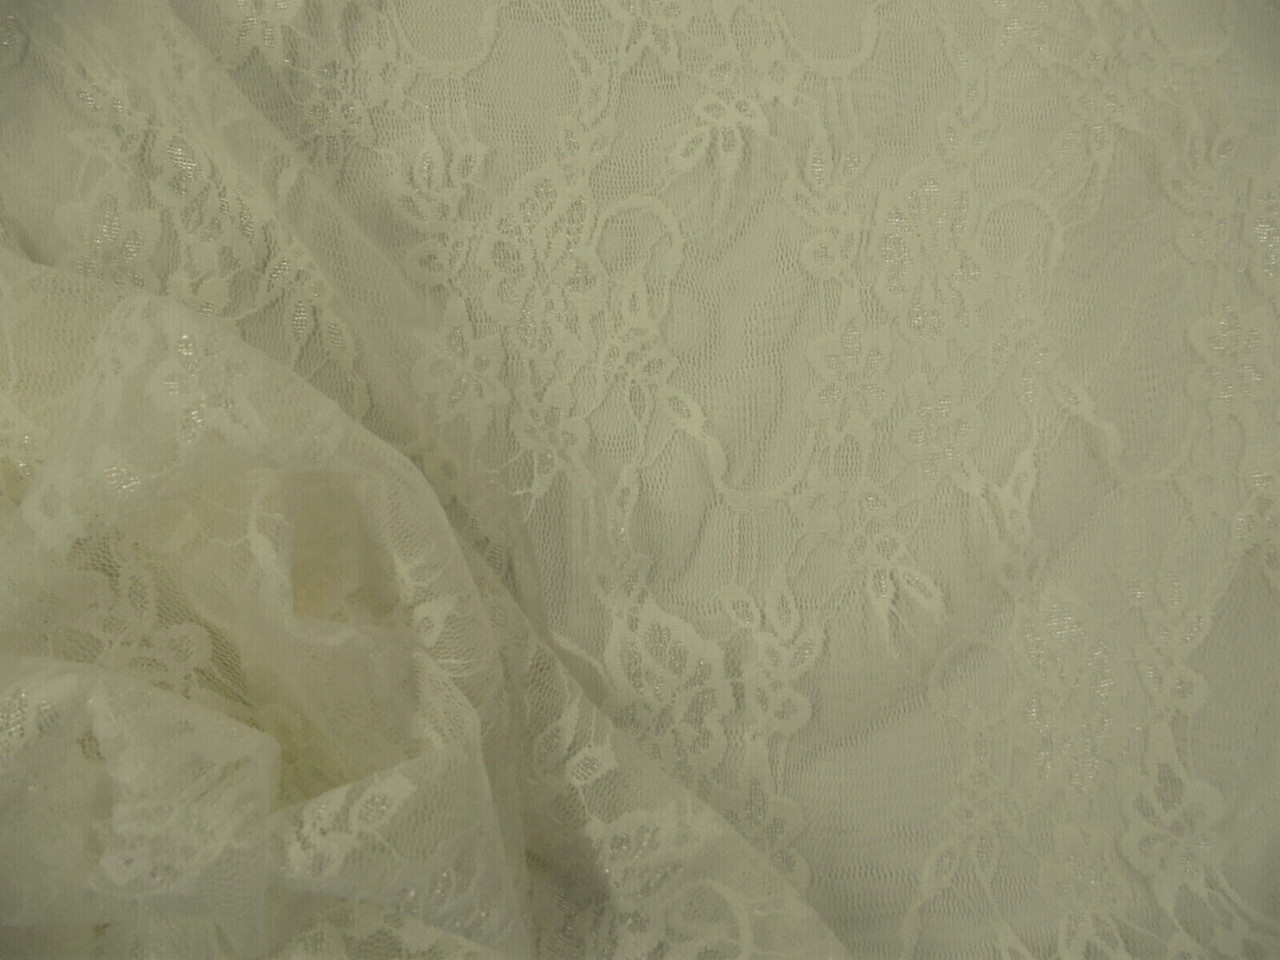 Stretch Lace Apparel Fabric Sheer Ivory Metallic Floral PP32